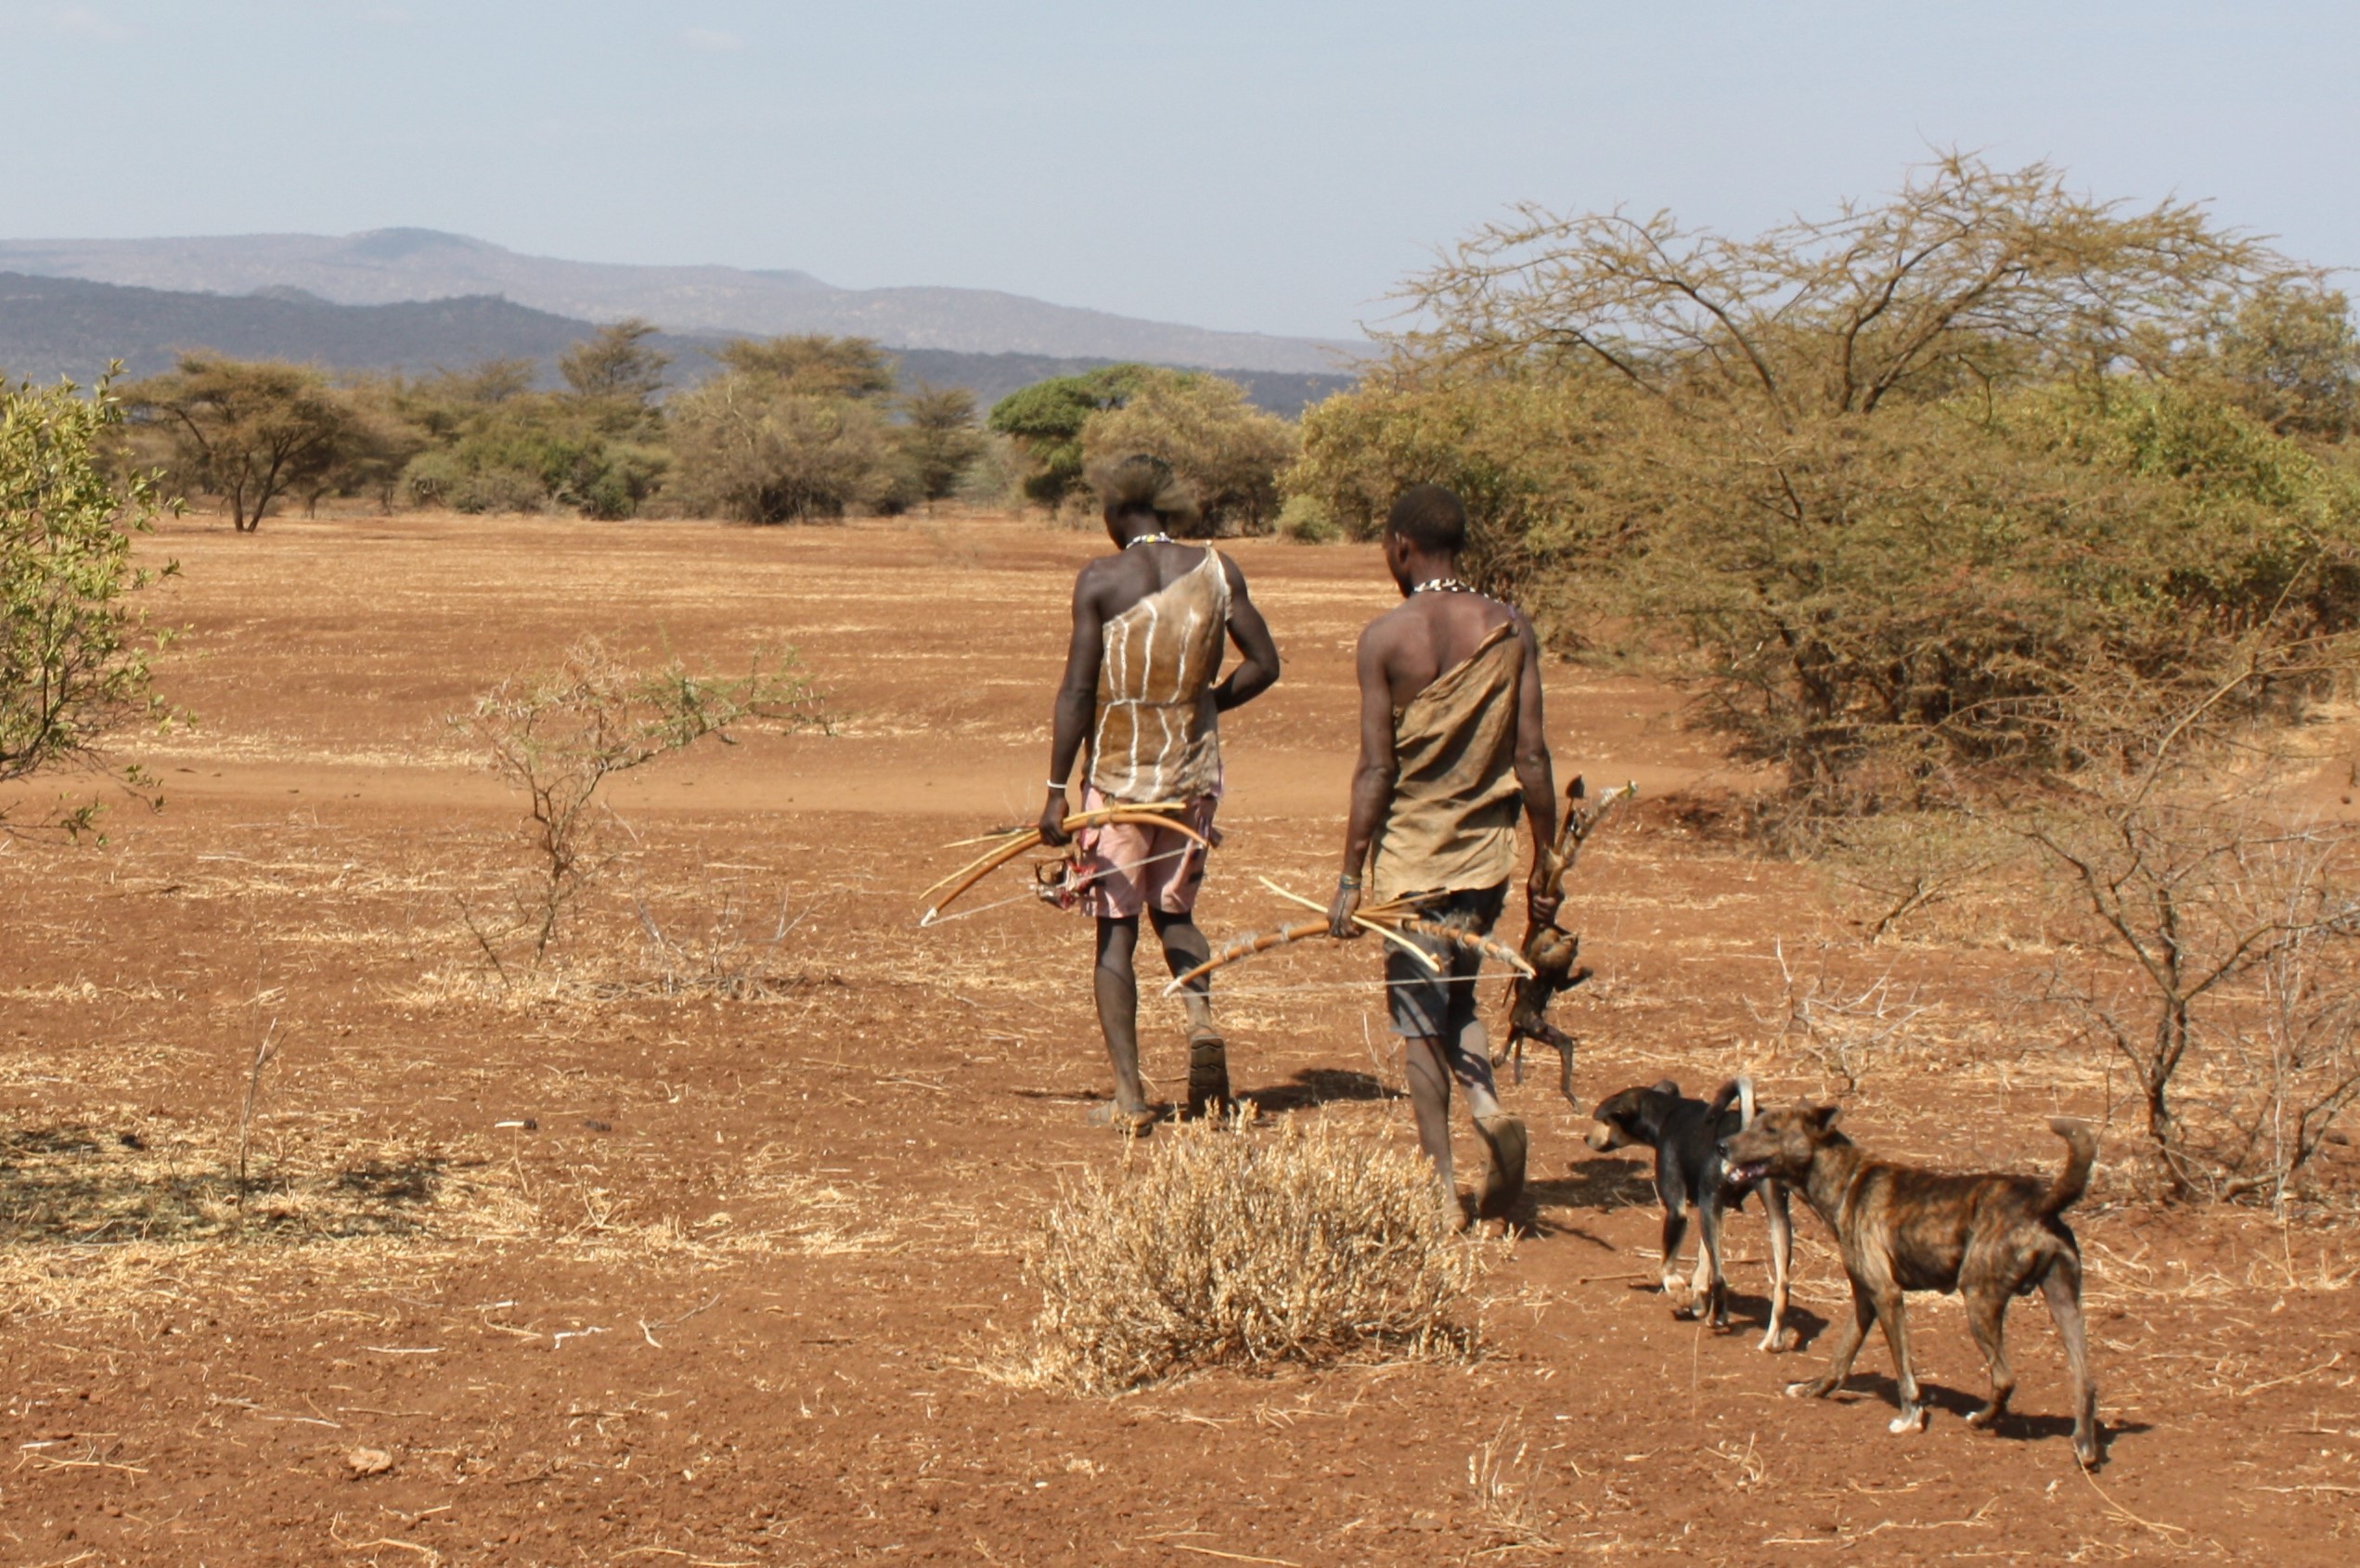 Two men and two dogs walk away from the camera. One man carries the day's catch.